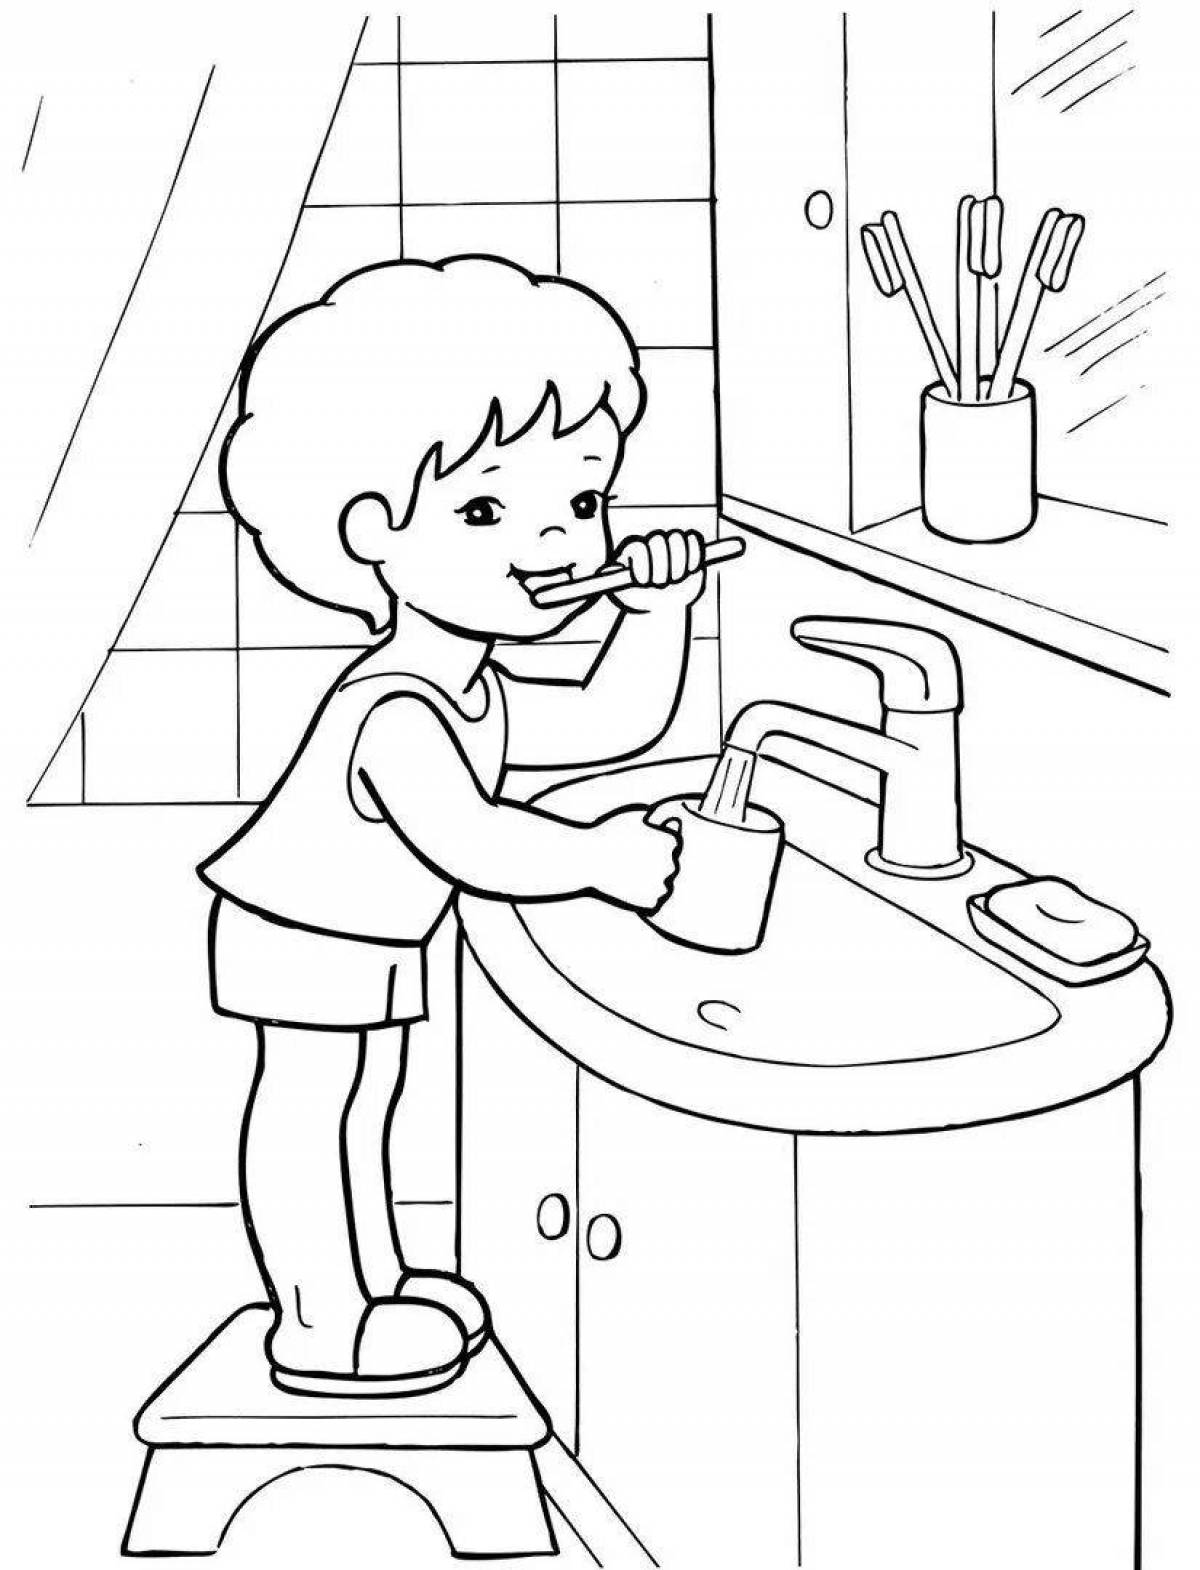 Health Inspiration Coloring Page